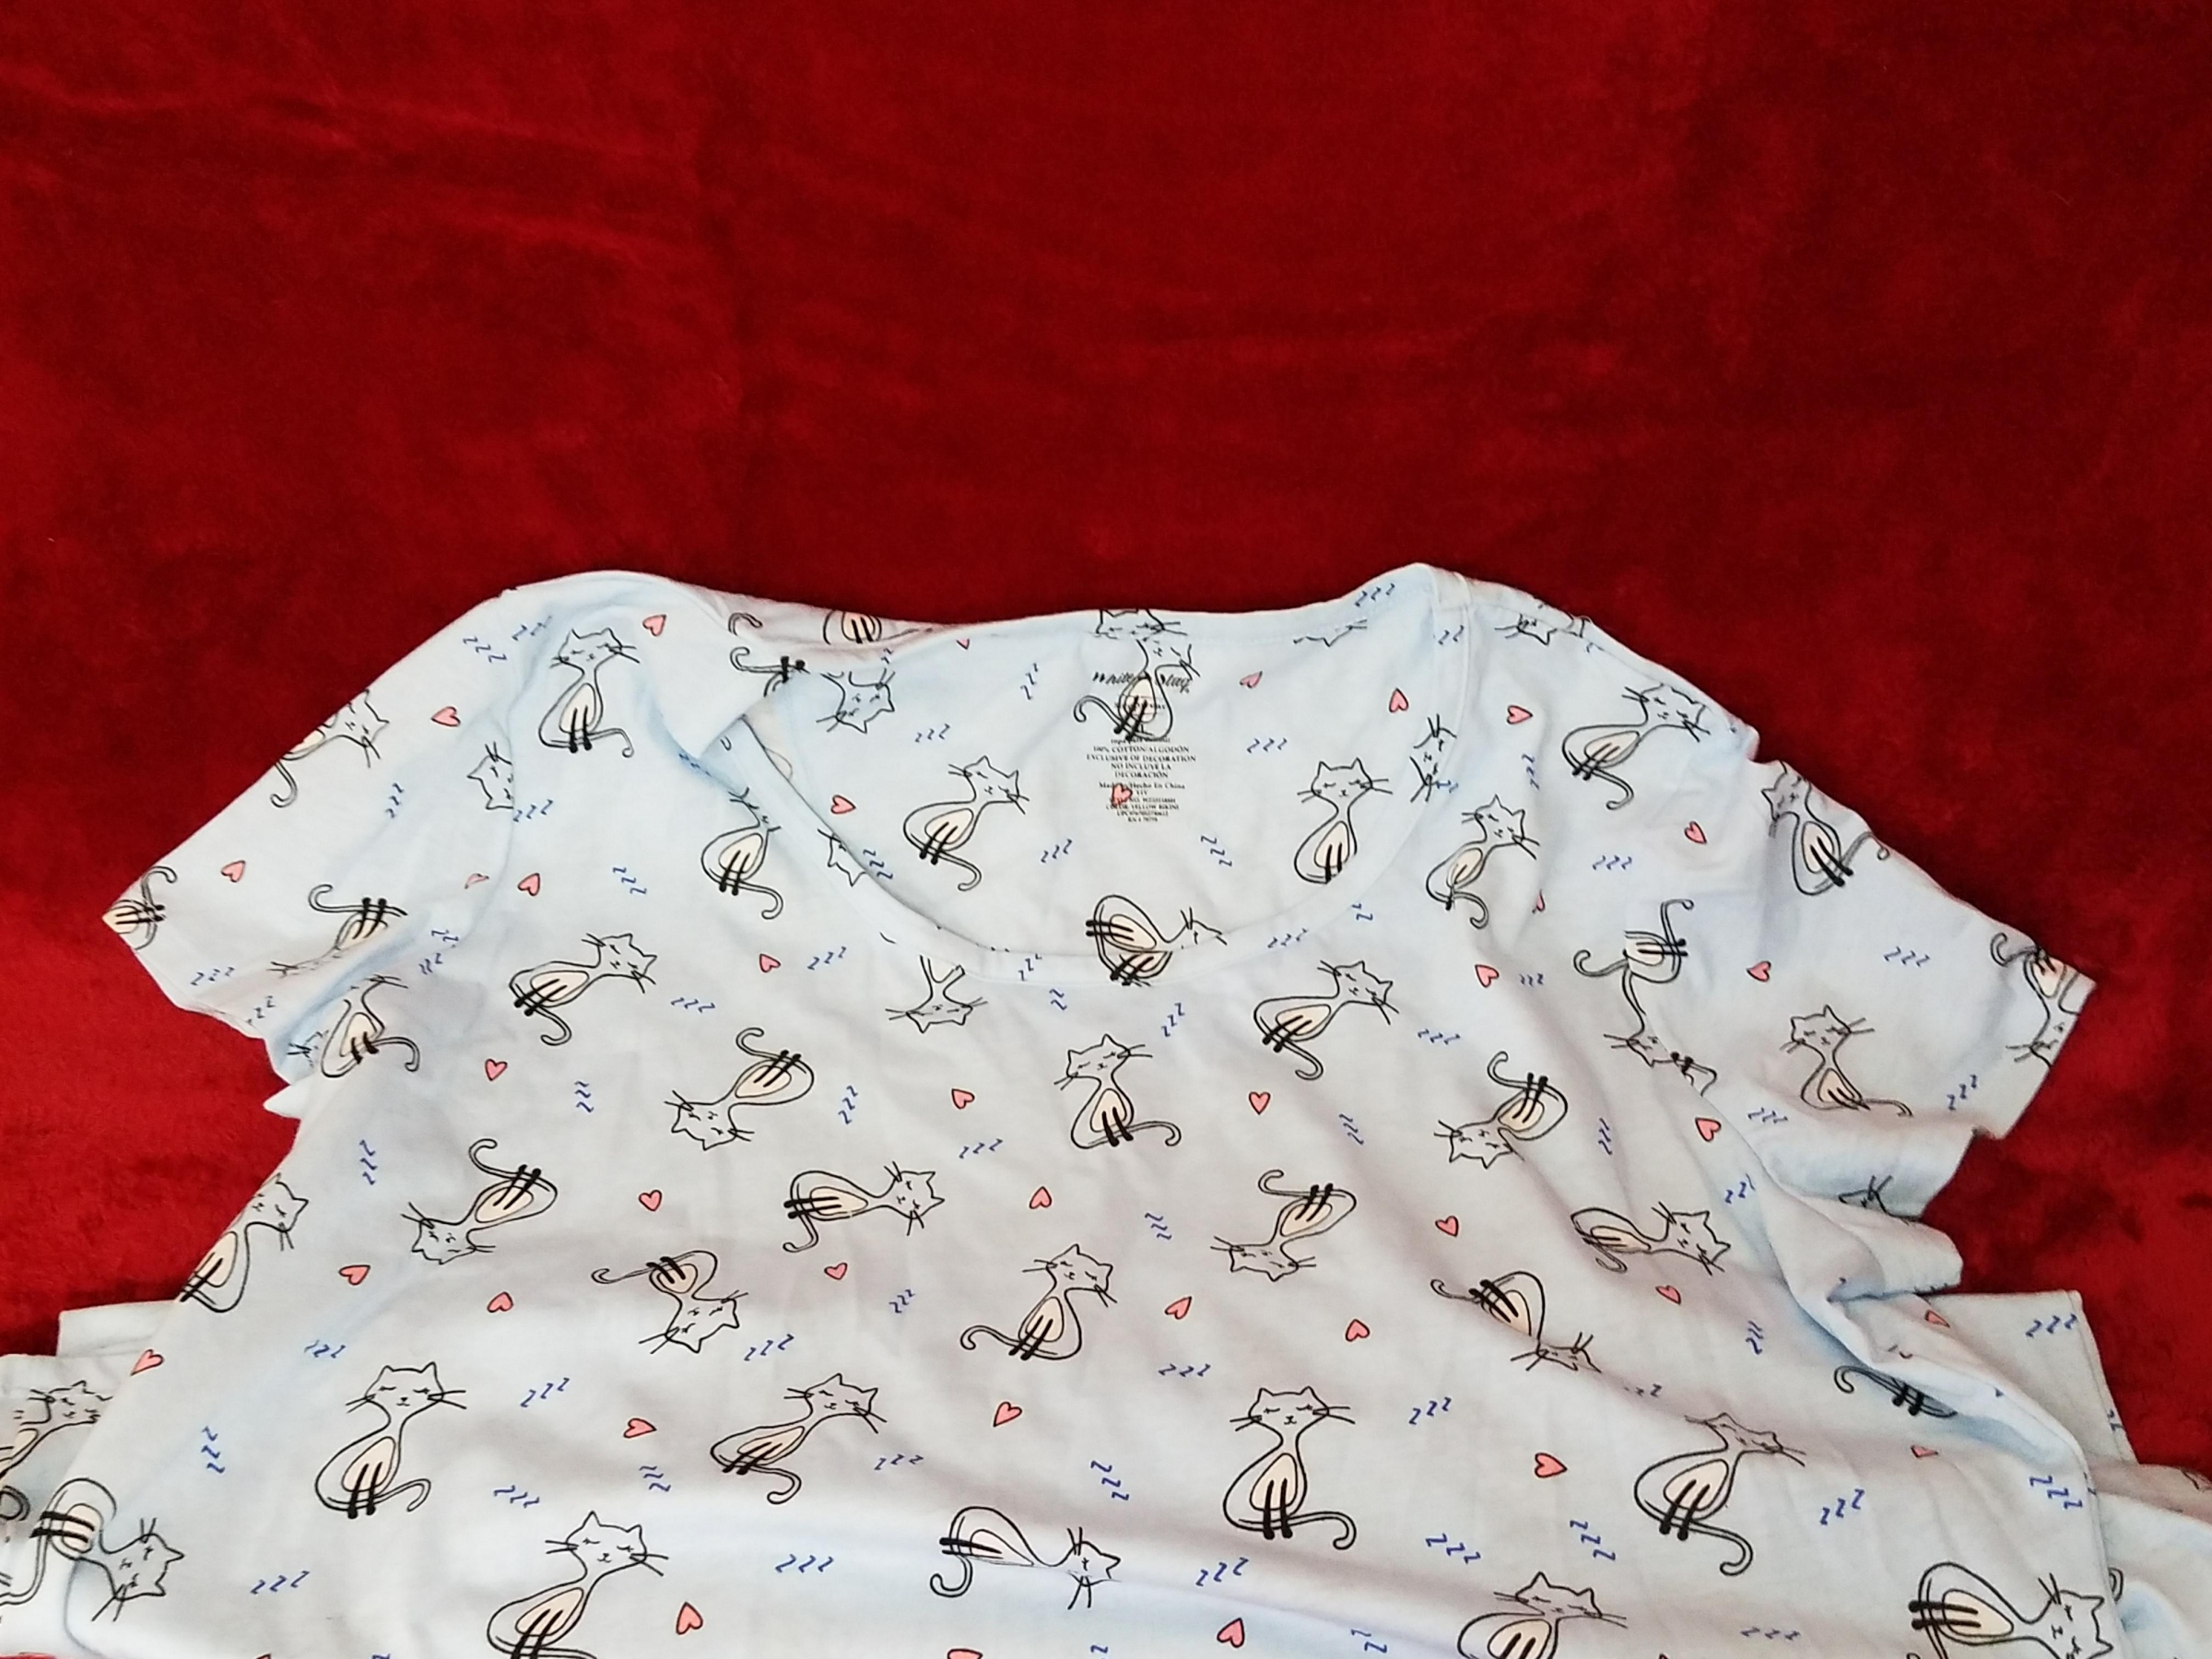 These precious pajamas are the Cat’s Meow!  High-quality, well-made, casual comfort especially for cat lovers.  Purr-fect!!!